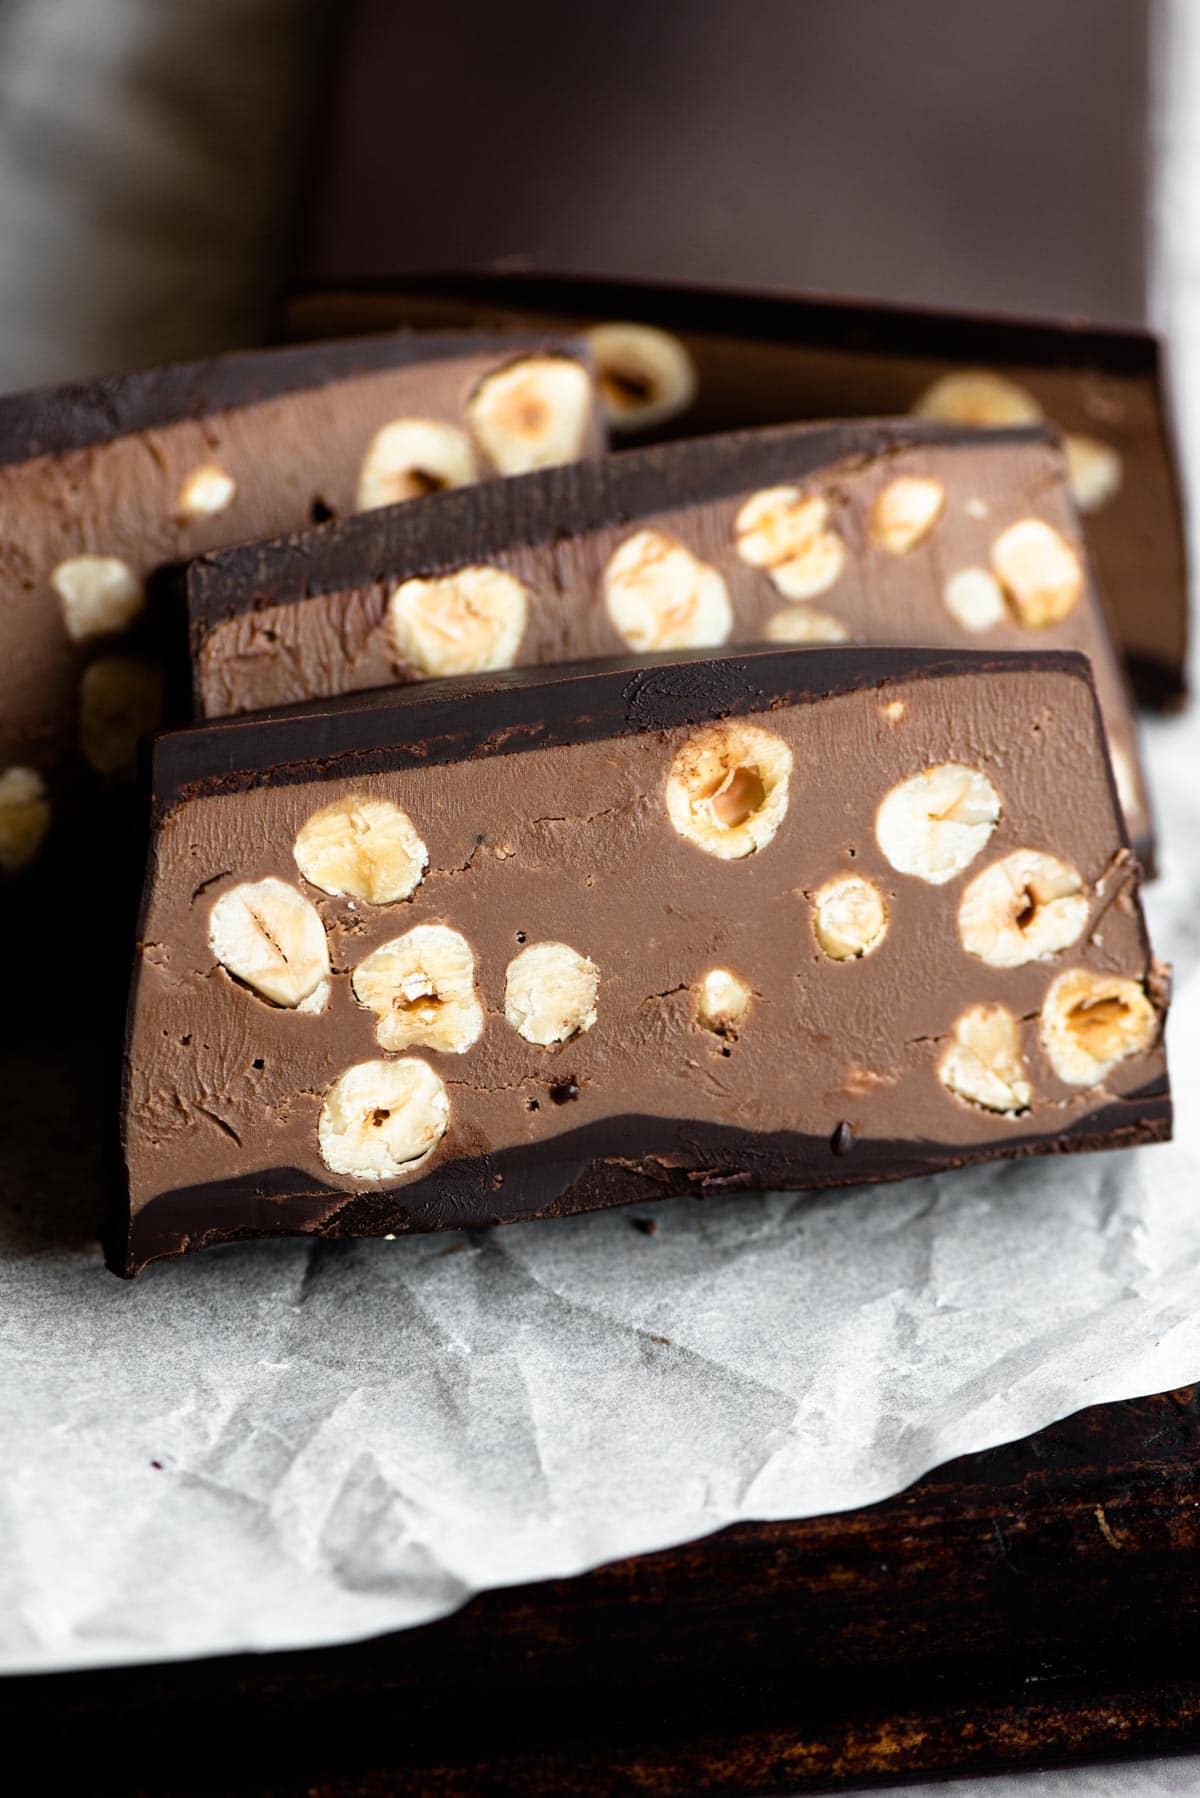 A close up of a chocolate hazelnut torrone cut into slices